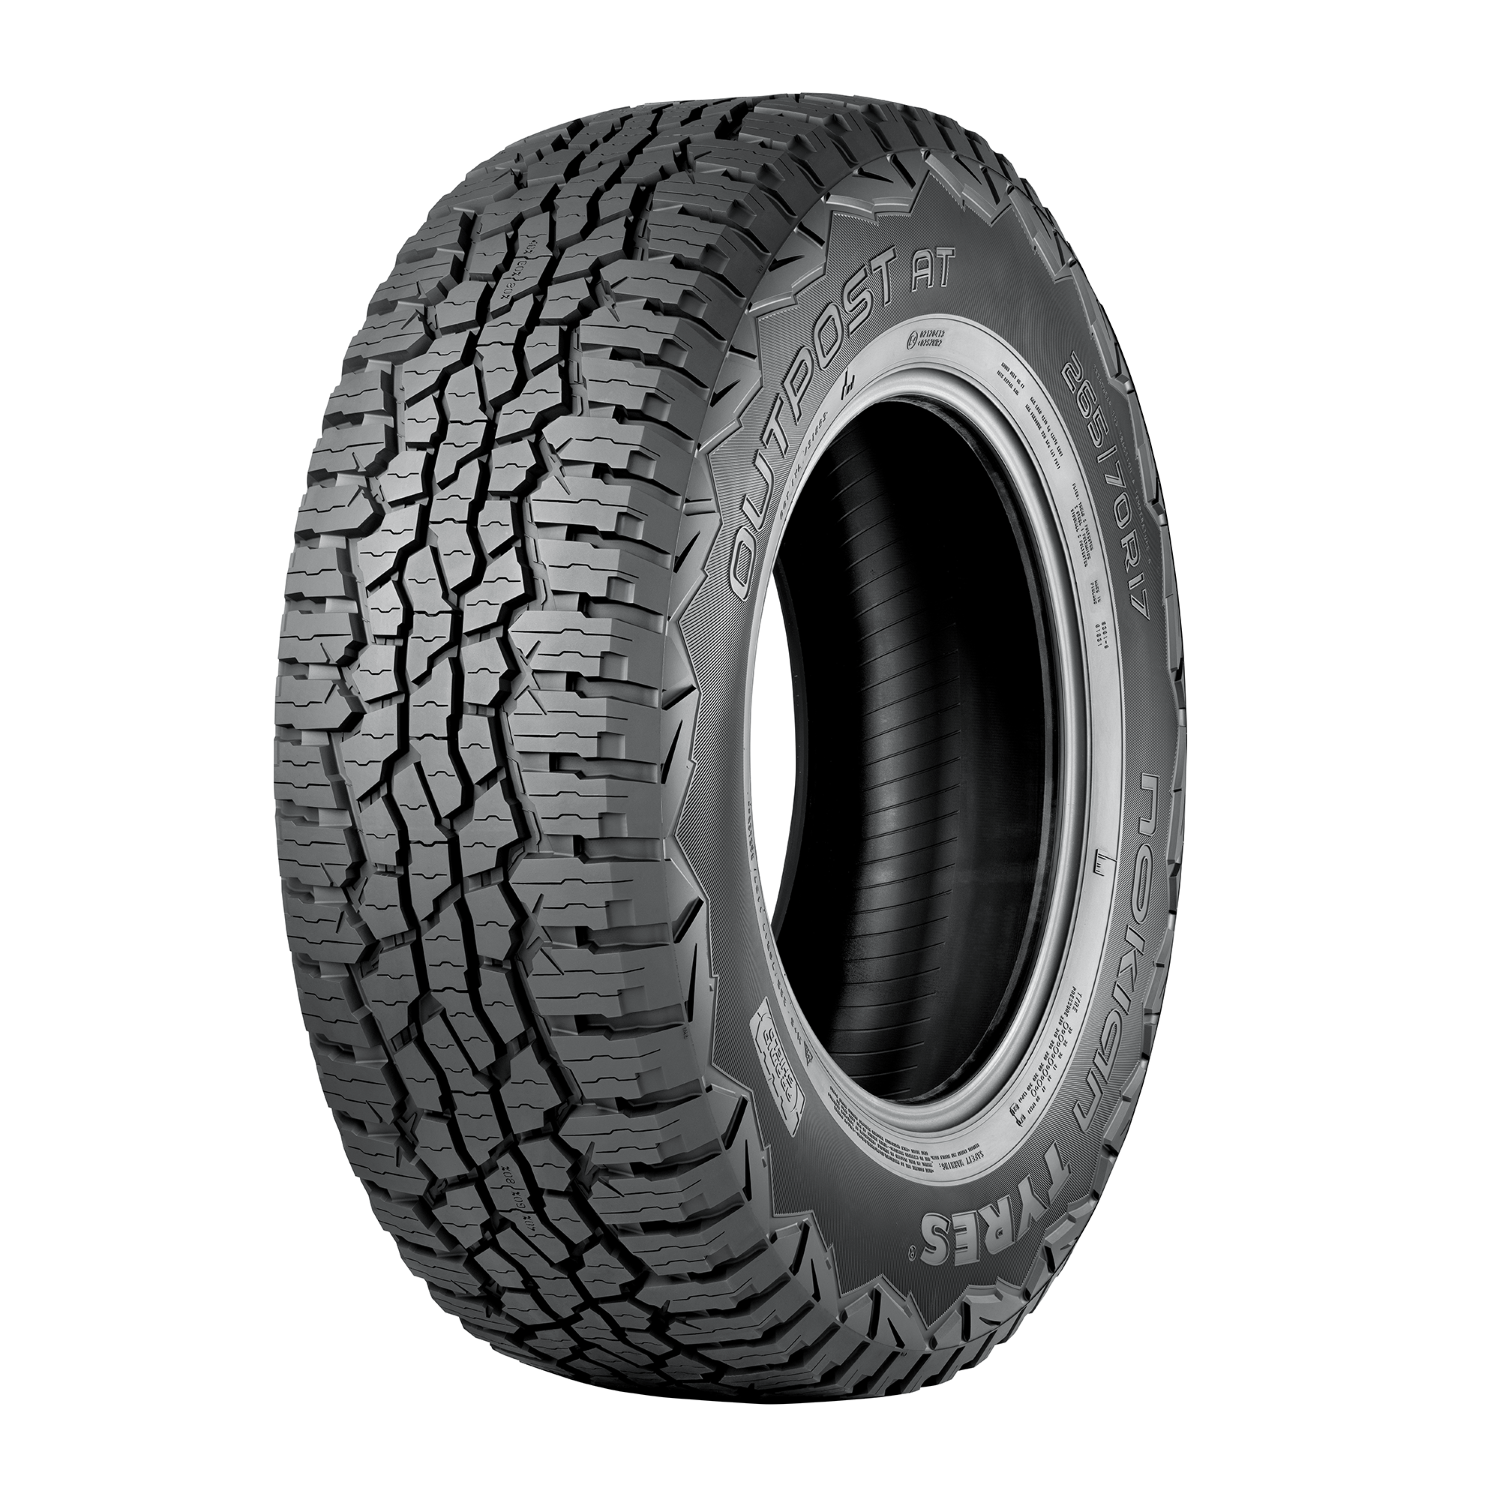 Tests - Outpost Reviews Tire AT and Nokian